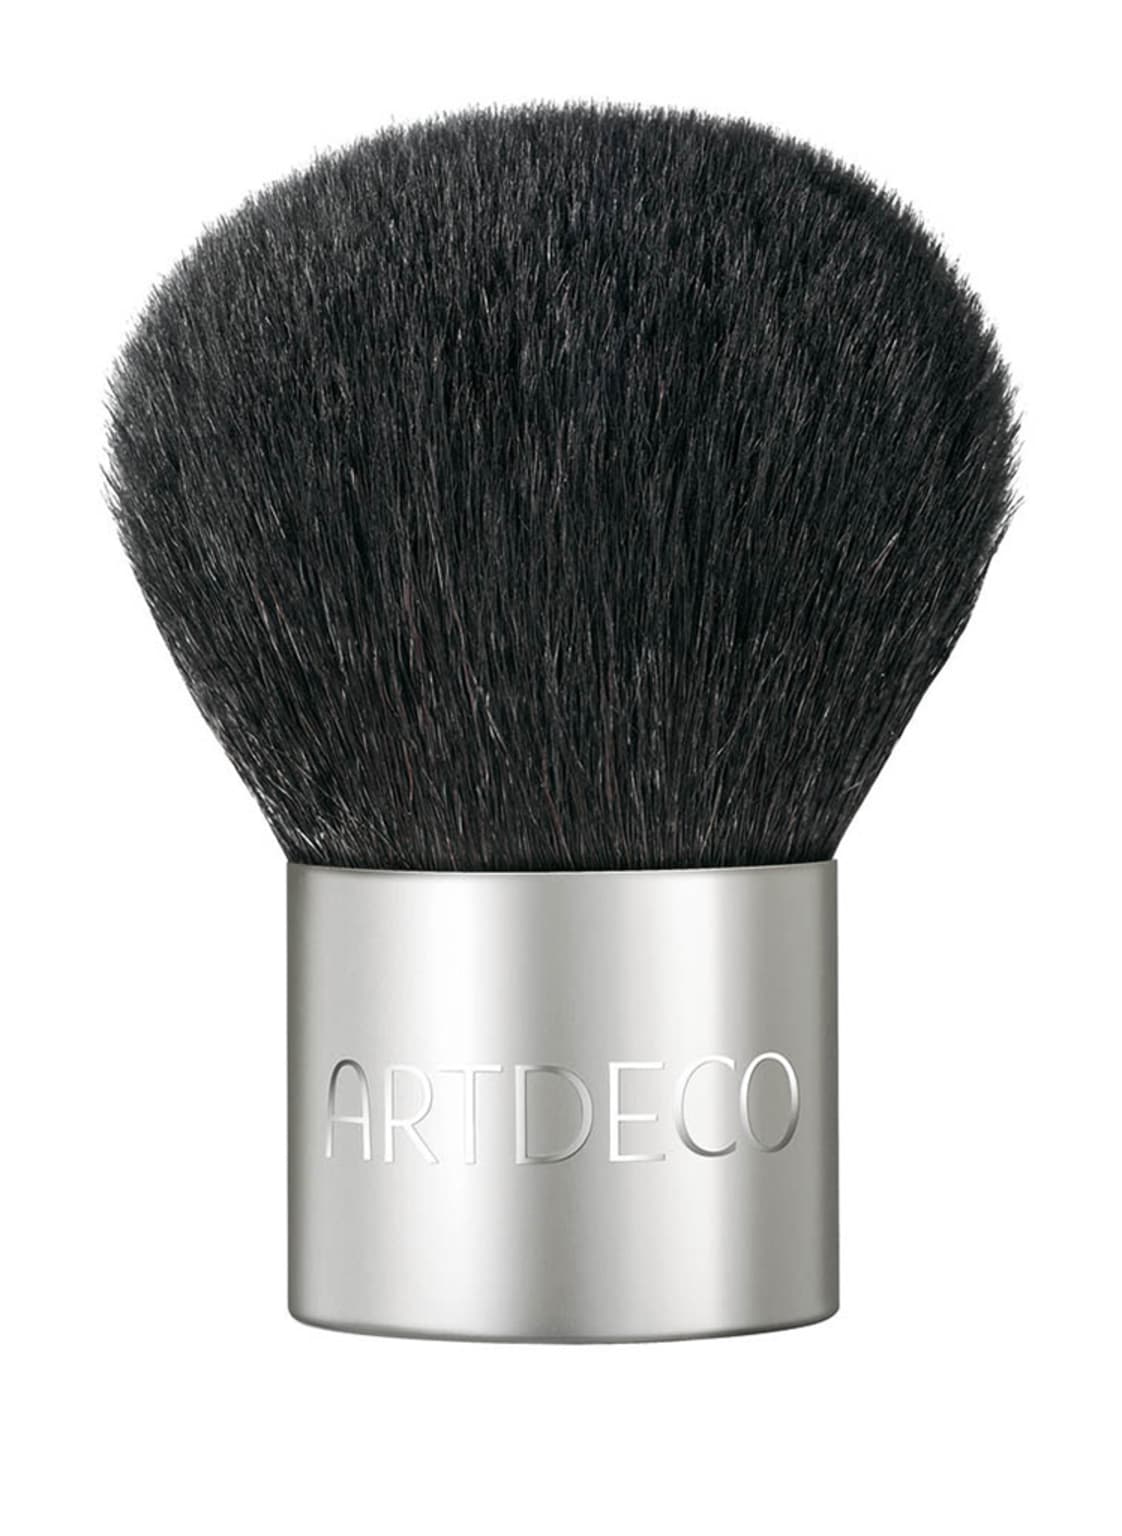 Image of Artdeco Brush For Mineral Powder Foundation Pinsel